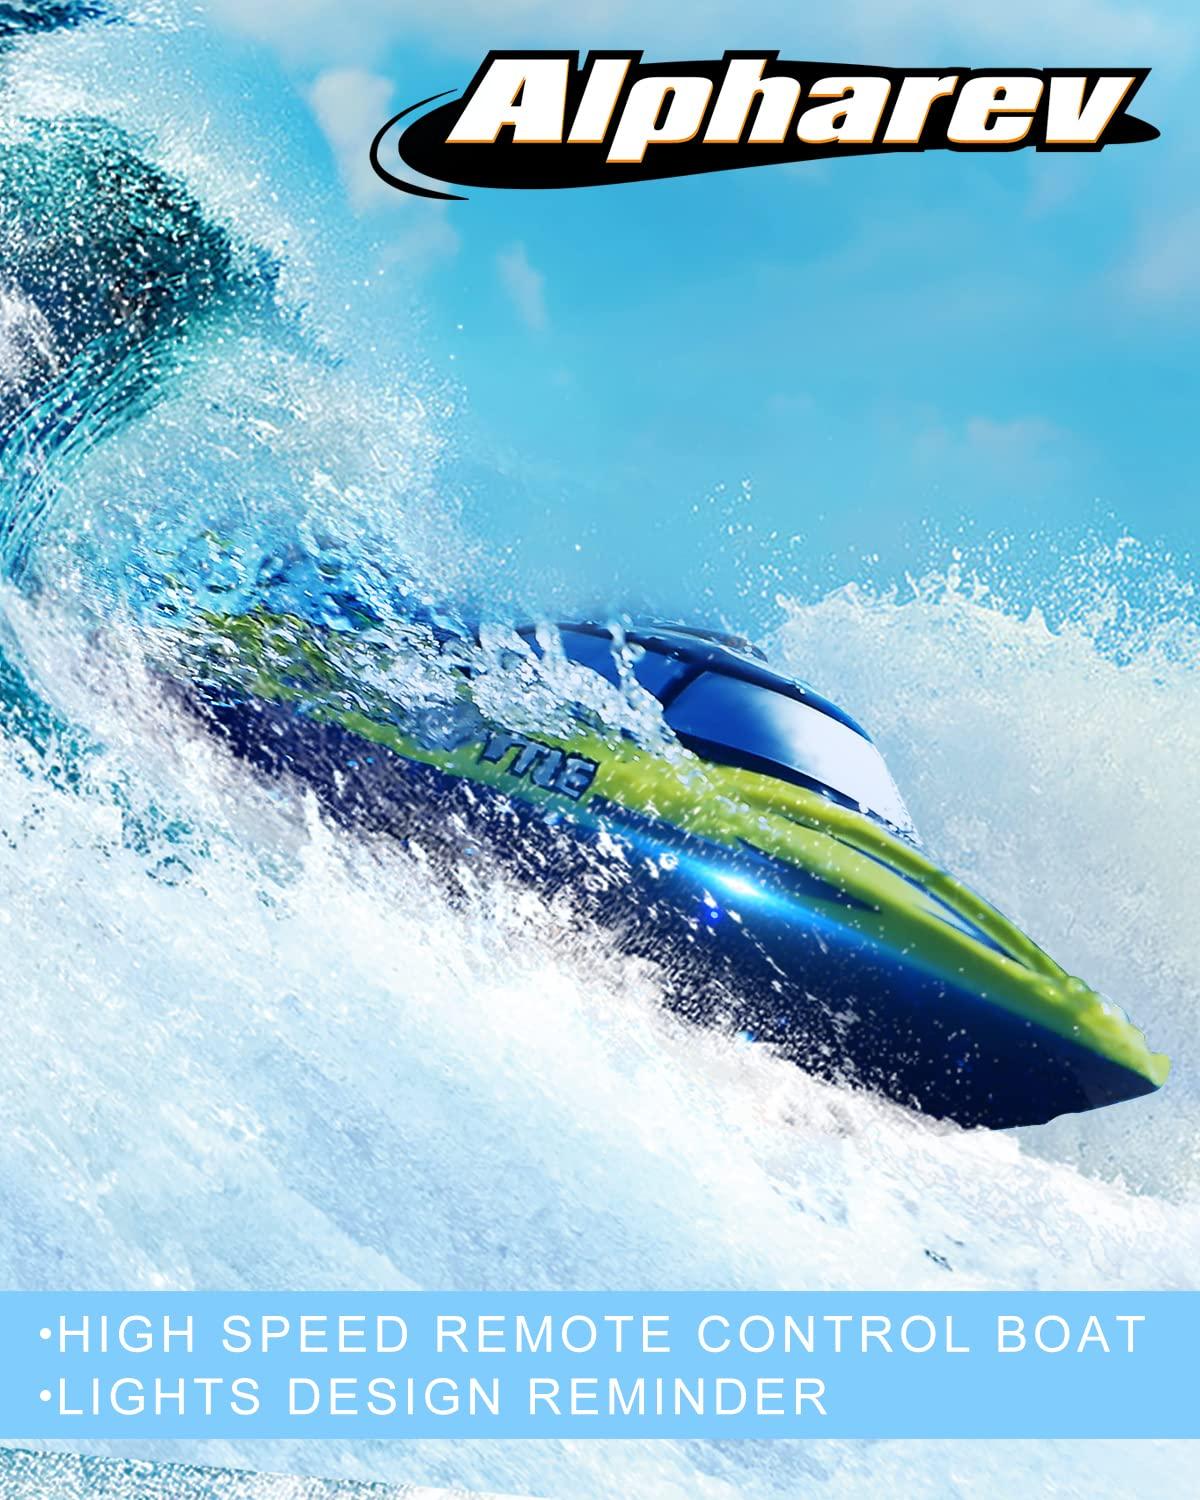 Rc Boat Alpha Rev R208: Power, Speed, and Style: The Alpha Rev R208 RC Boat 